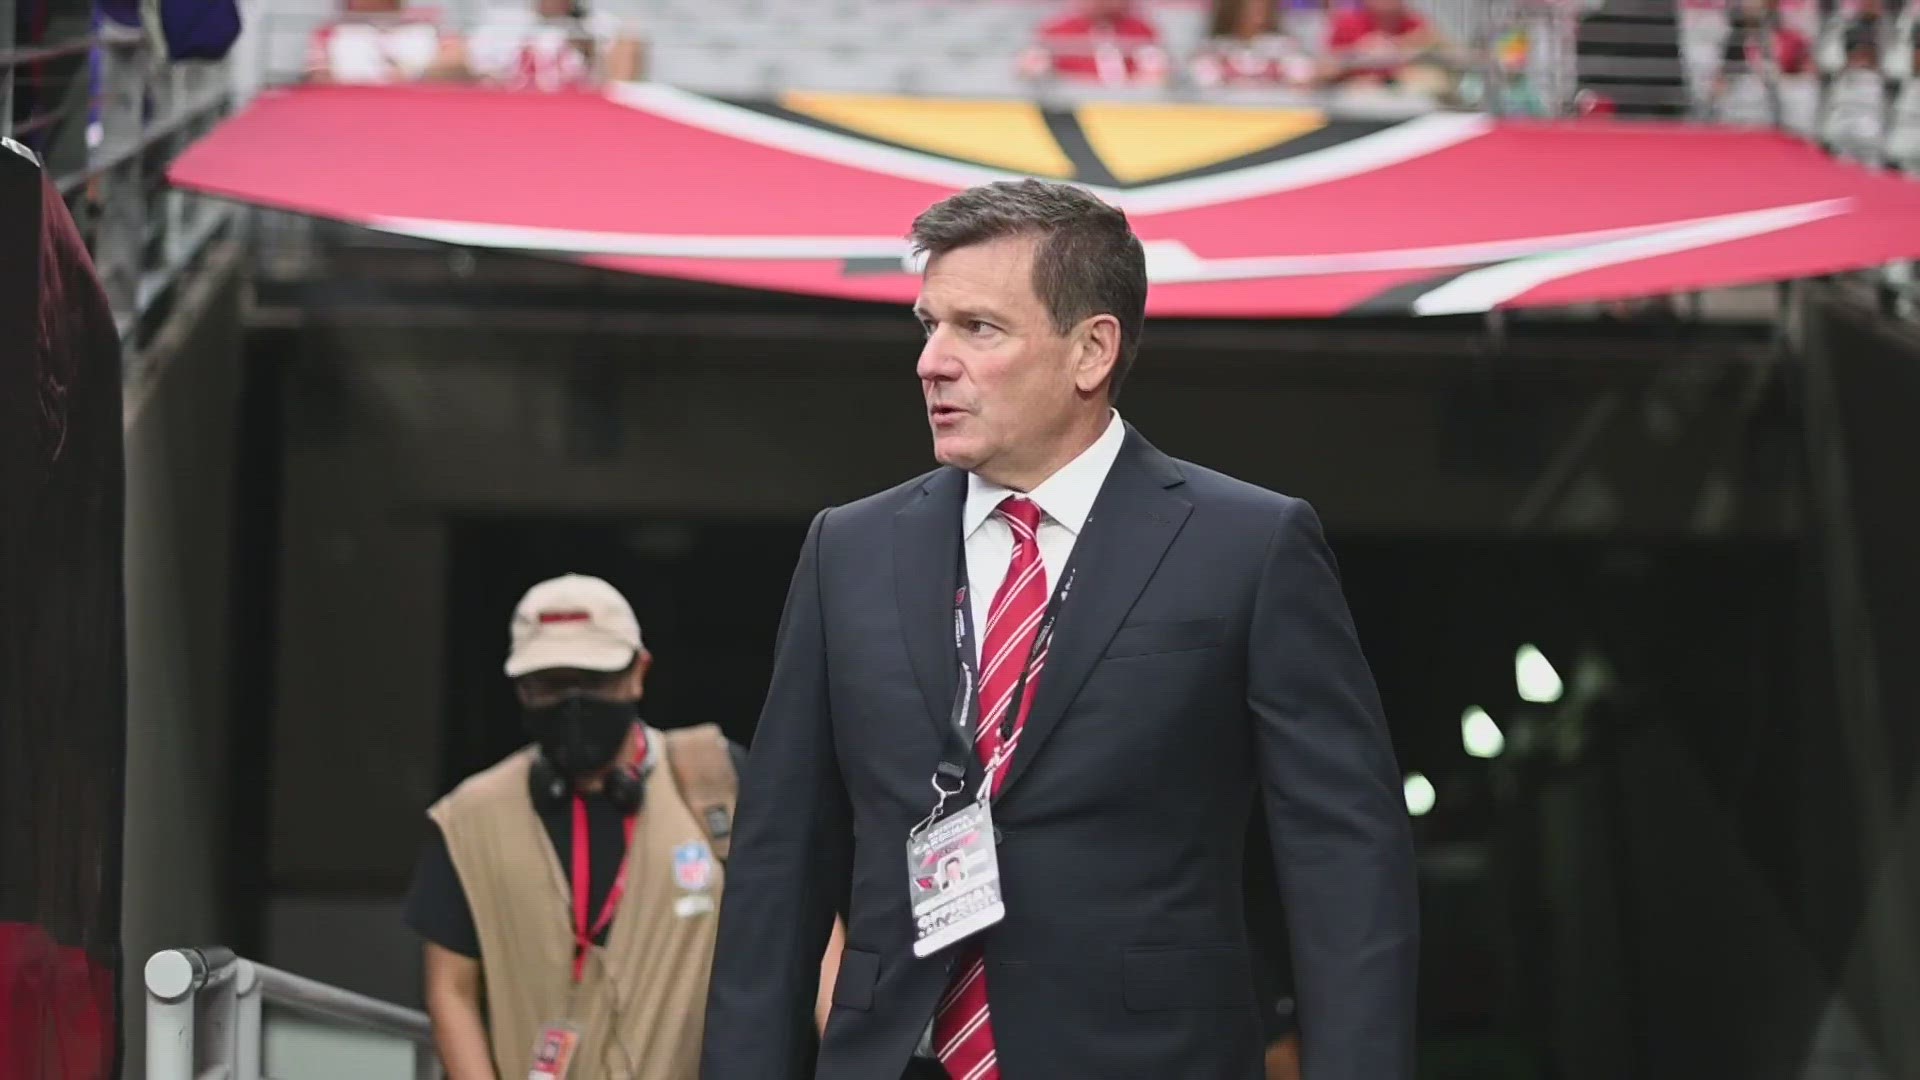 Former Arizona Cardinals Vice President Terry McDonough filed an arbitration claim this week.